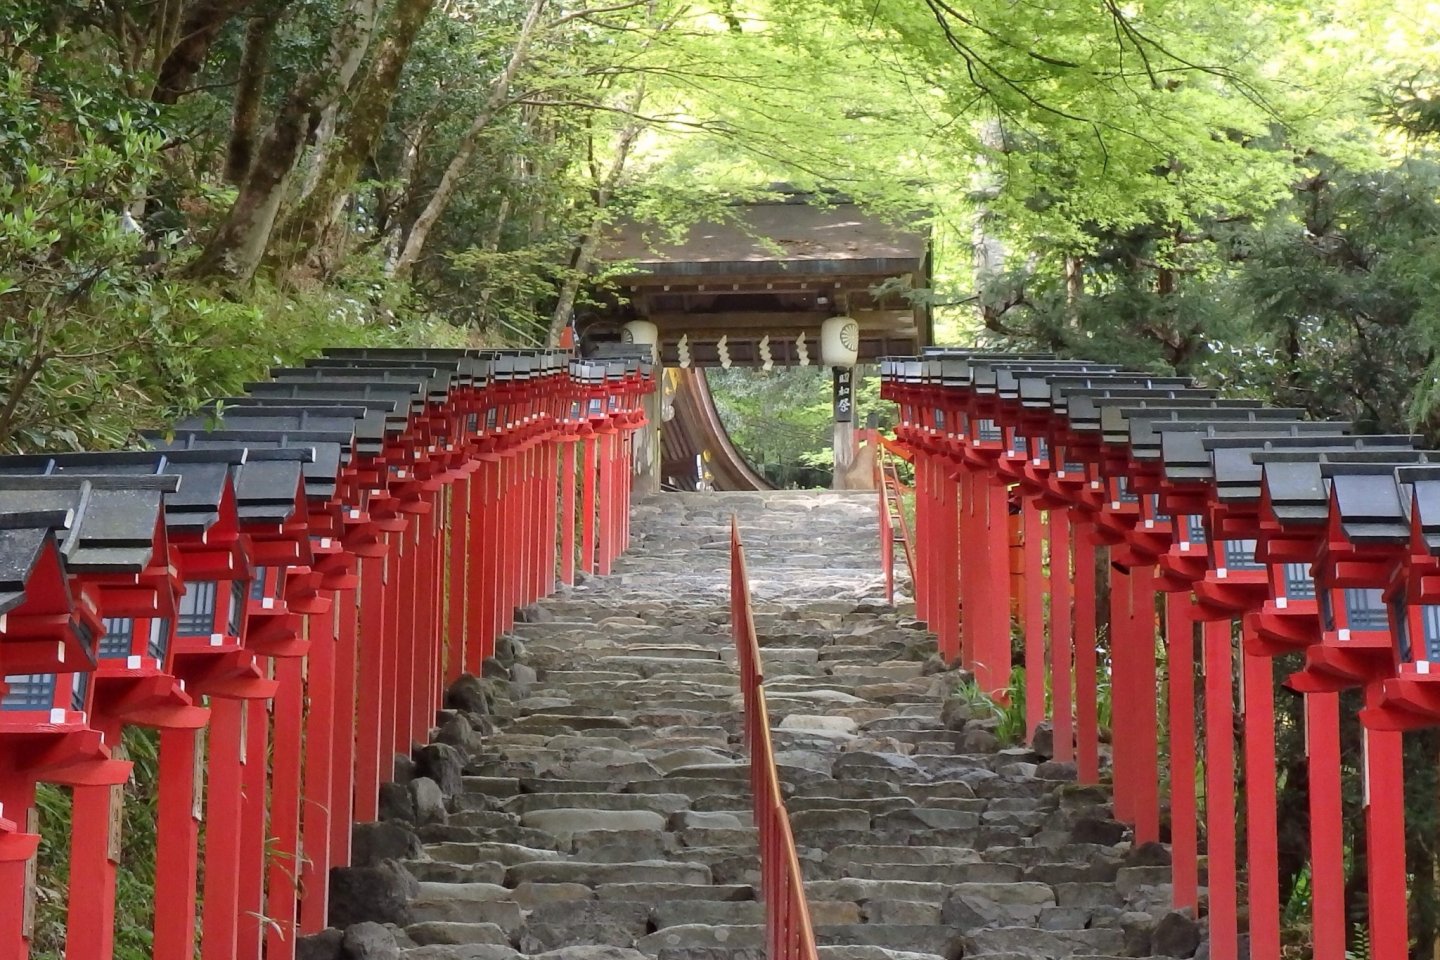 The stairs to the main shrine are lined with beautiful red lanterns.